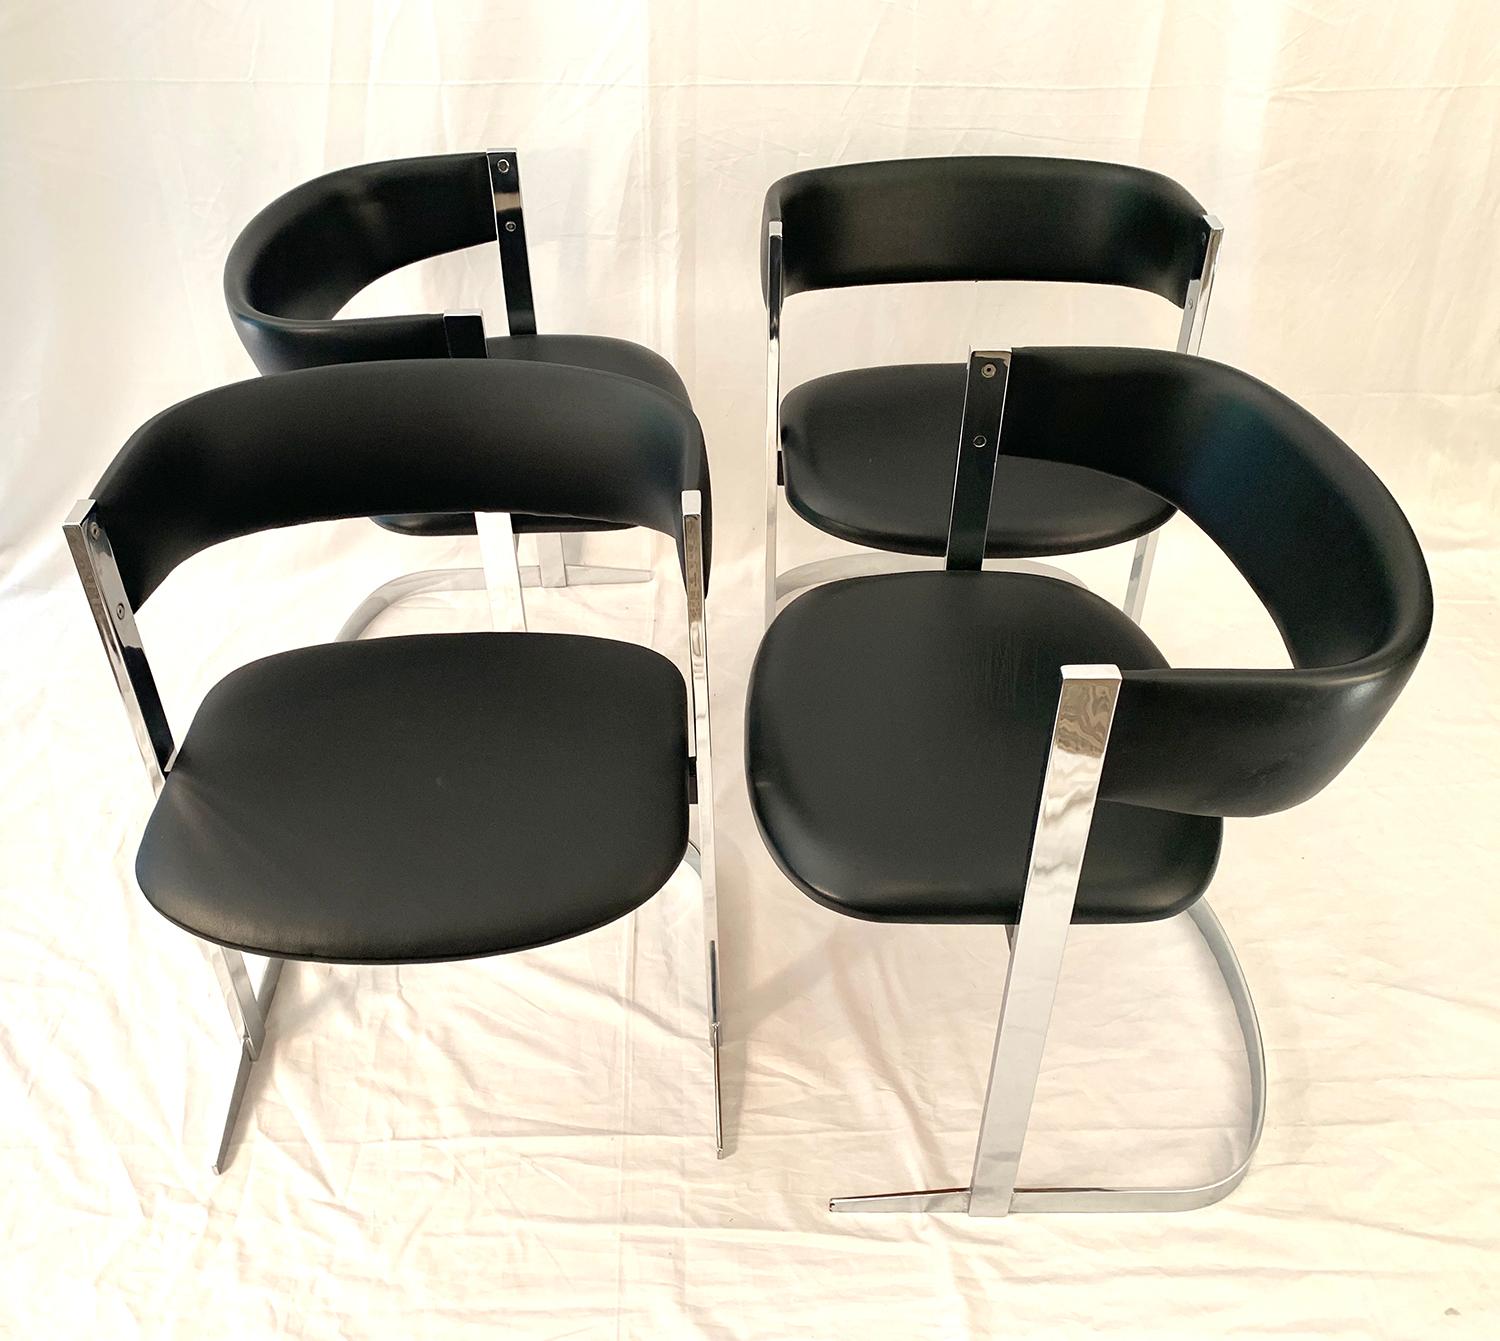 Beautiful set of four dining chair or desk in chromed metal, furnished with a seat and backrest in leatherette. The leatherette is slightly scratched. The set dates from the 1970s.

Très belle ensemble de quatre chaise de salle à manger ou de bureau